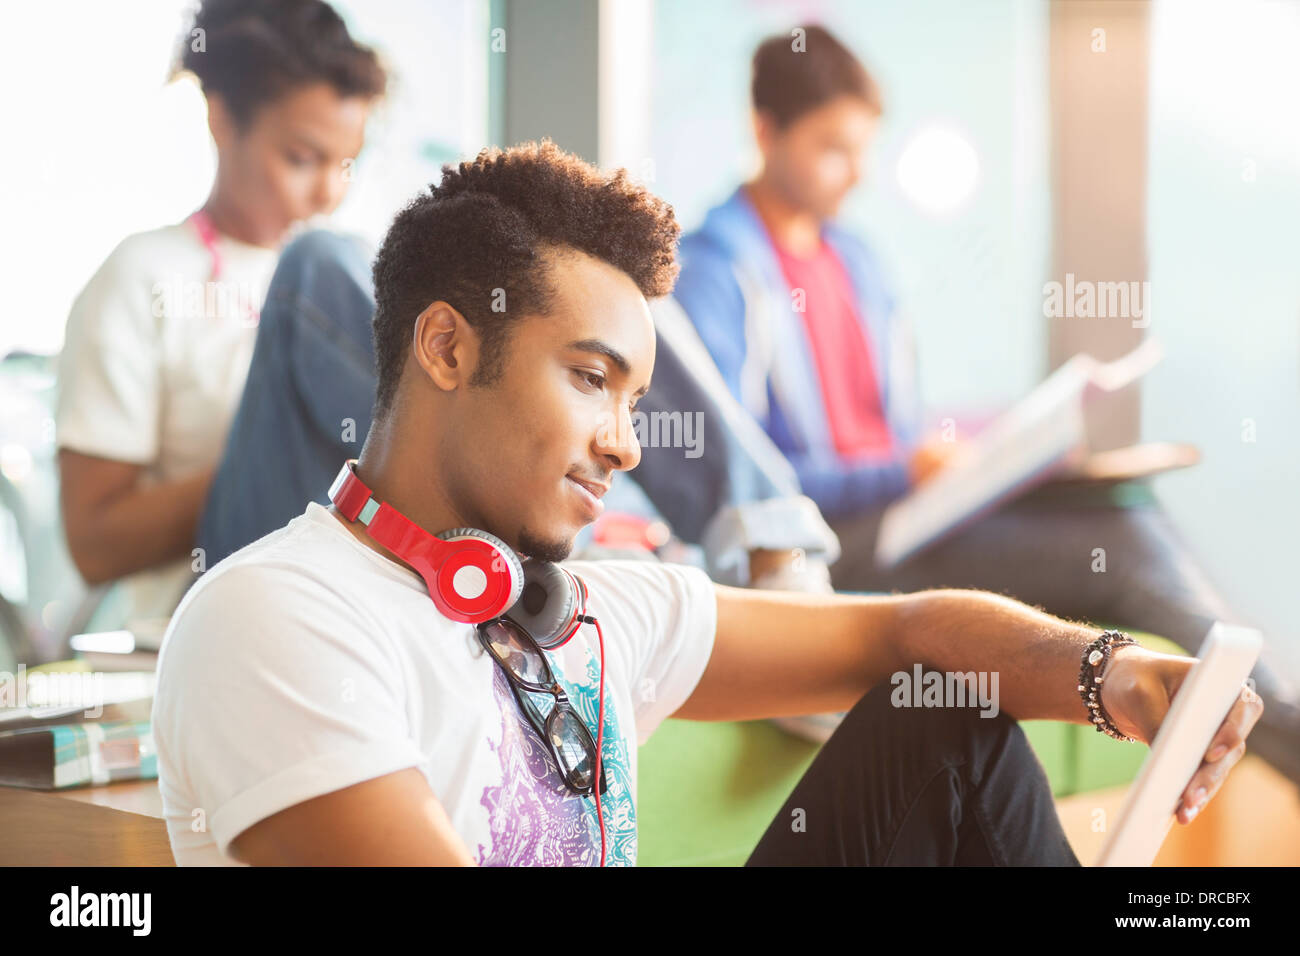 University student using digital tablet in lounge Stock Photo